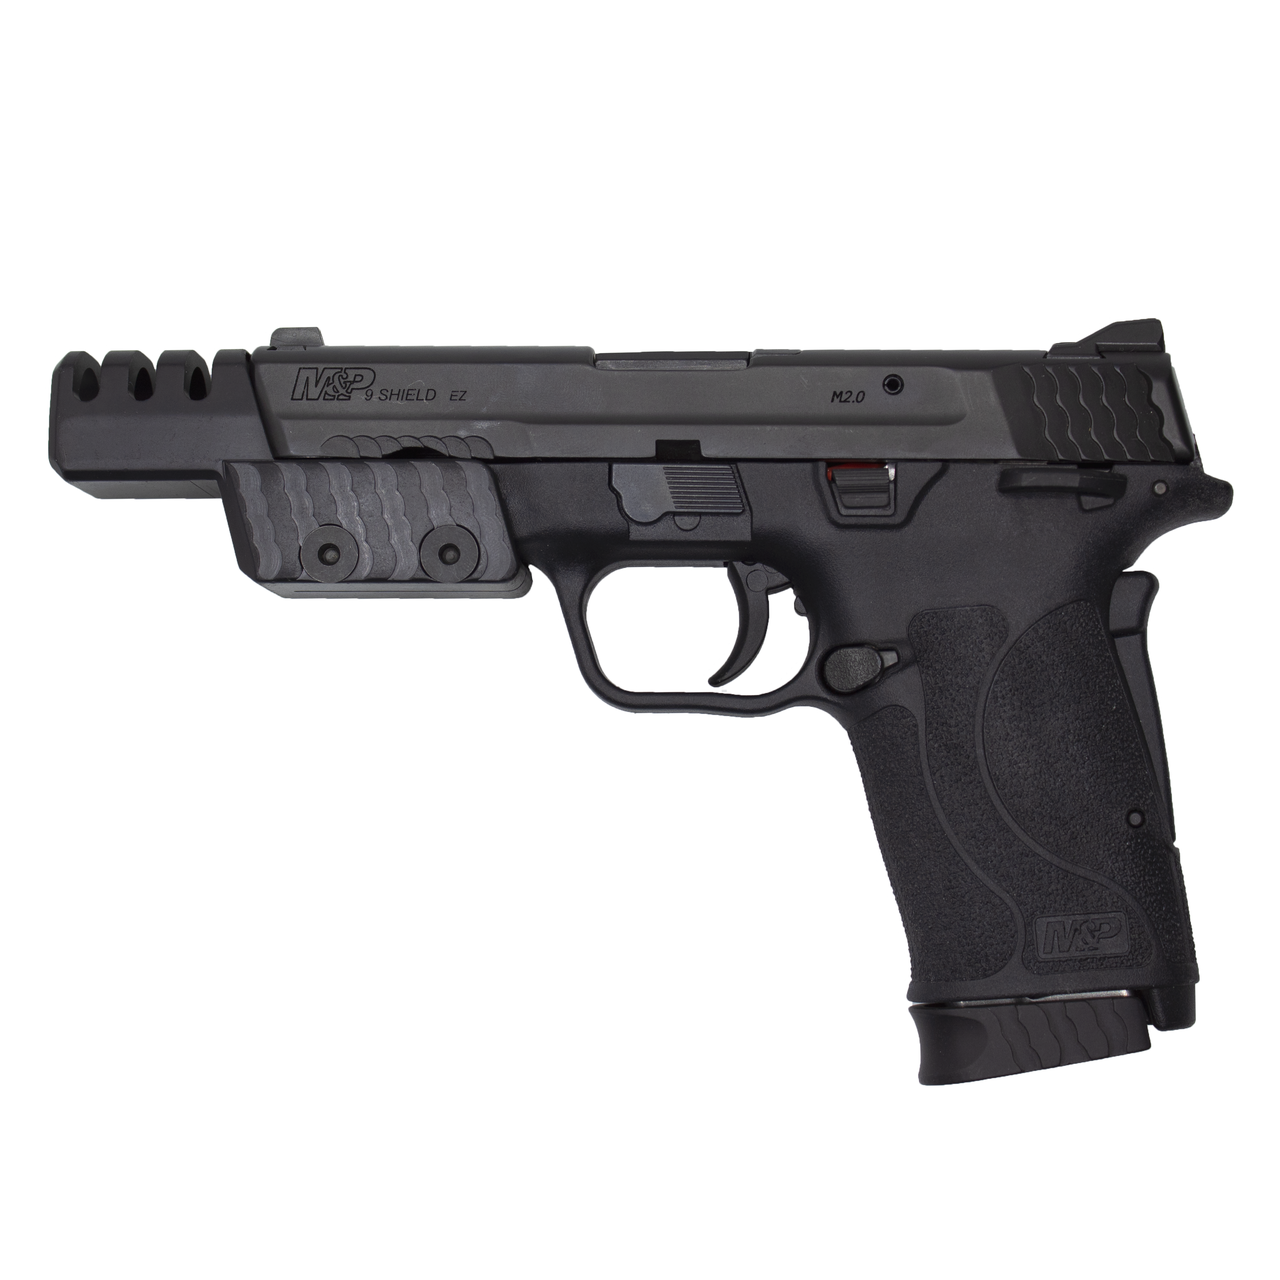 This for the 9mm or 380?